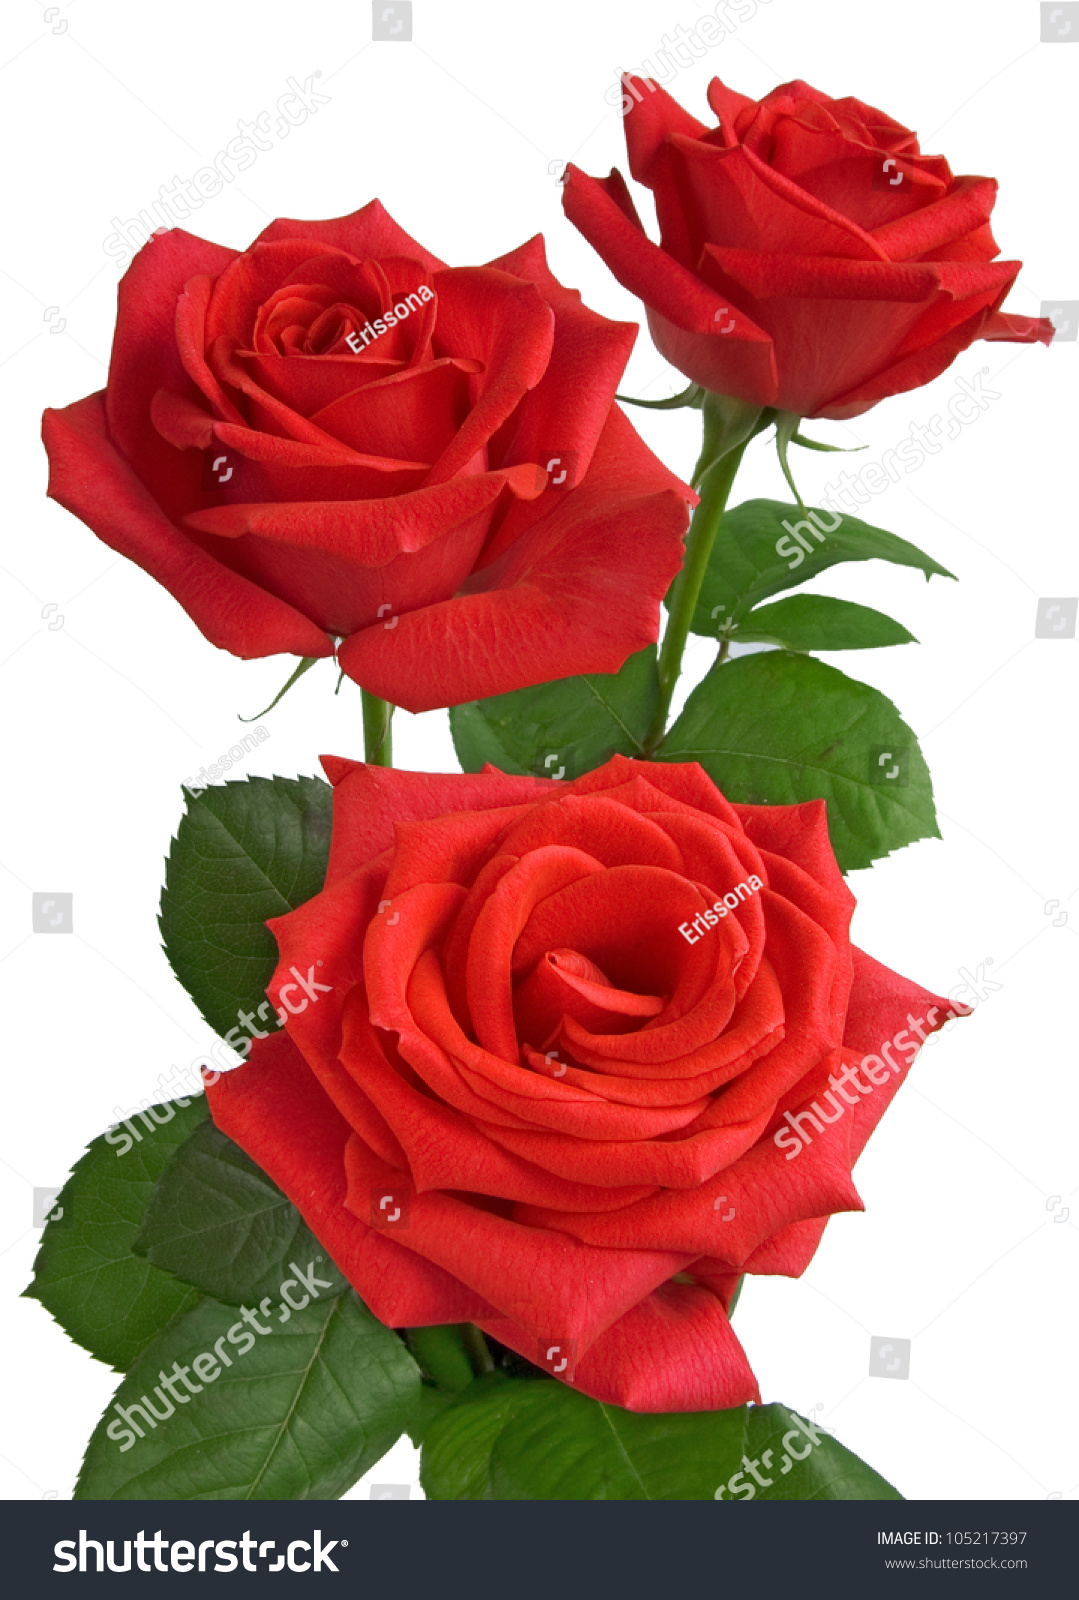 Three Red Roses Isolated On White Stock Photo 105217397 : Shutterstock